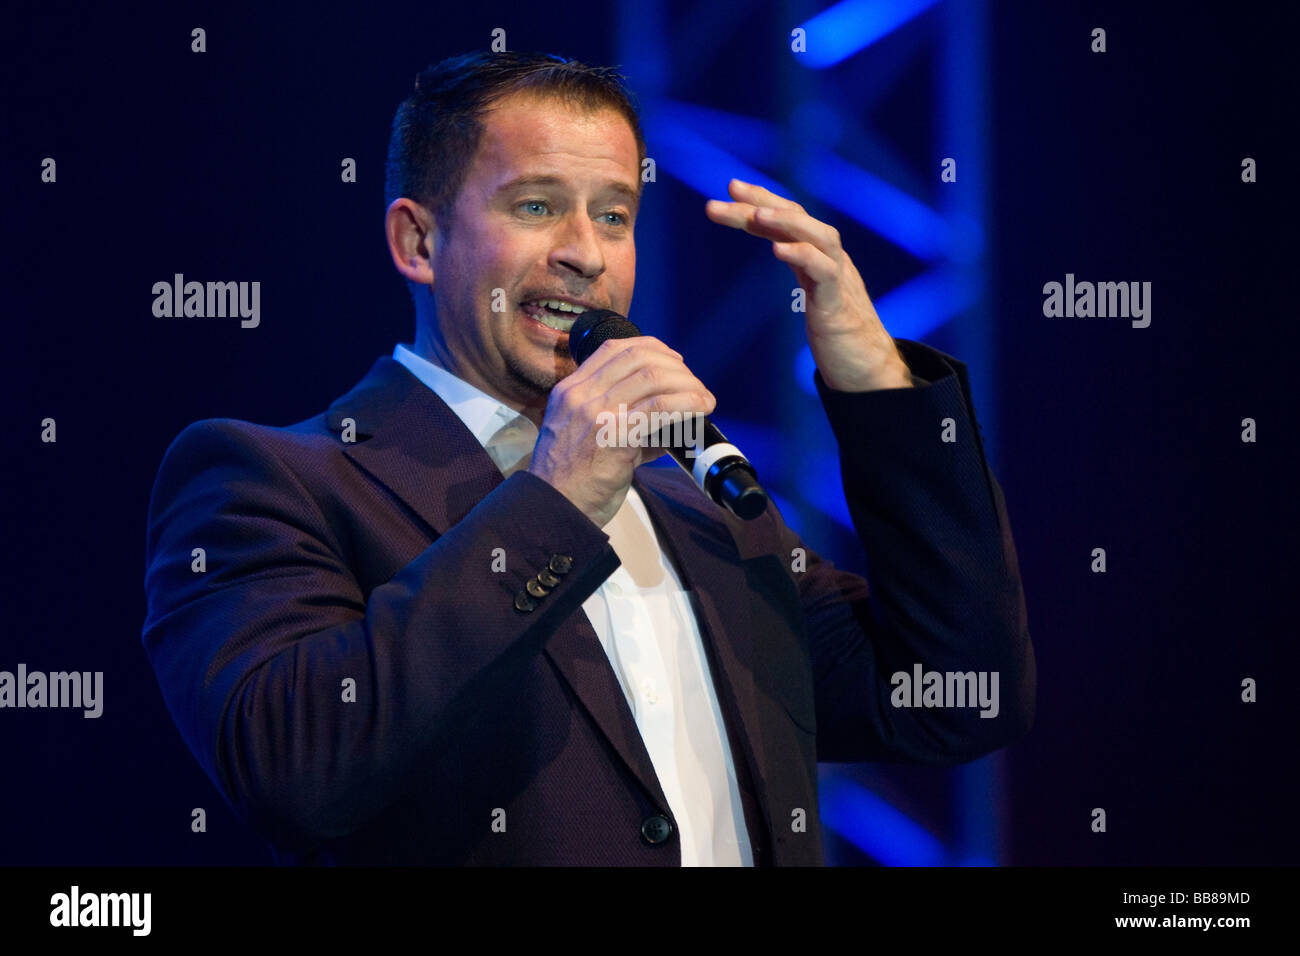 Swiss schlager singer and presenter Leonard performing live at the 9th Schlager Nacht at Festhalle Allmend concert hall, Lucern Stock Photo